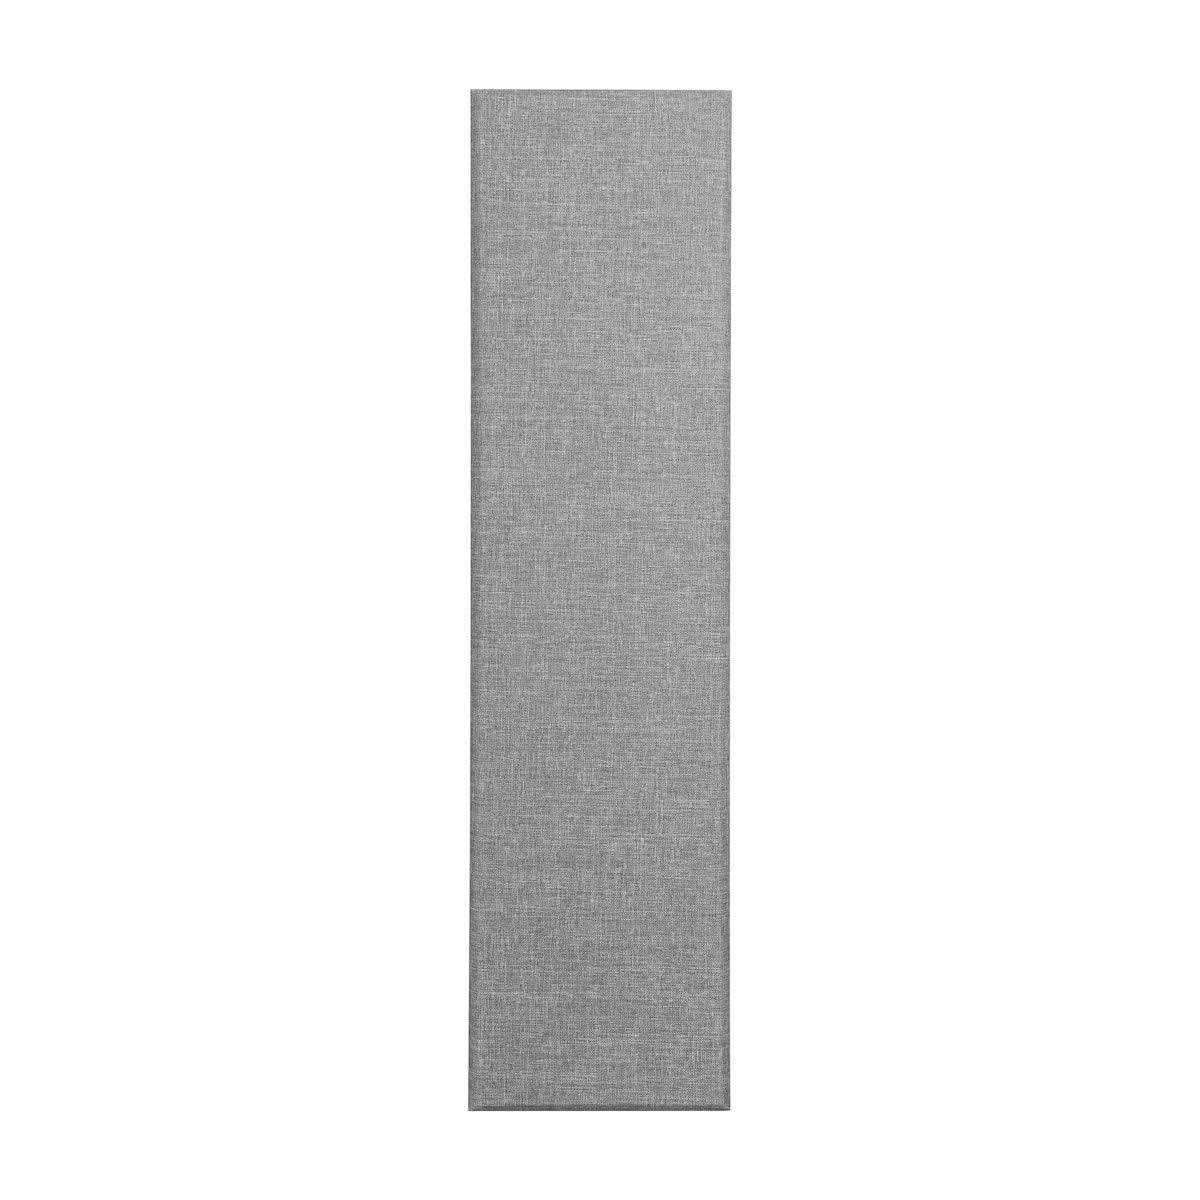 Primacoustic Broadway Wall Panels - Control Columns, Grey